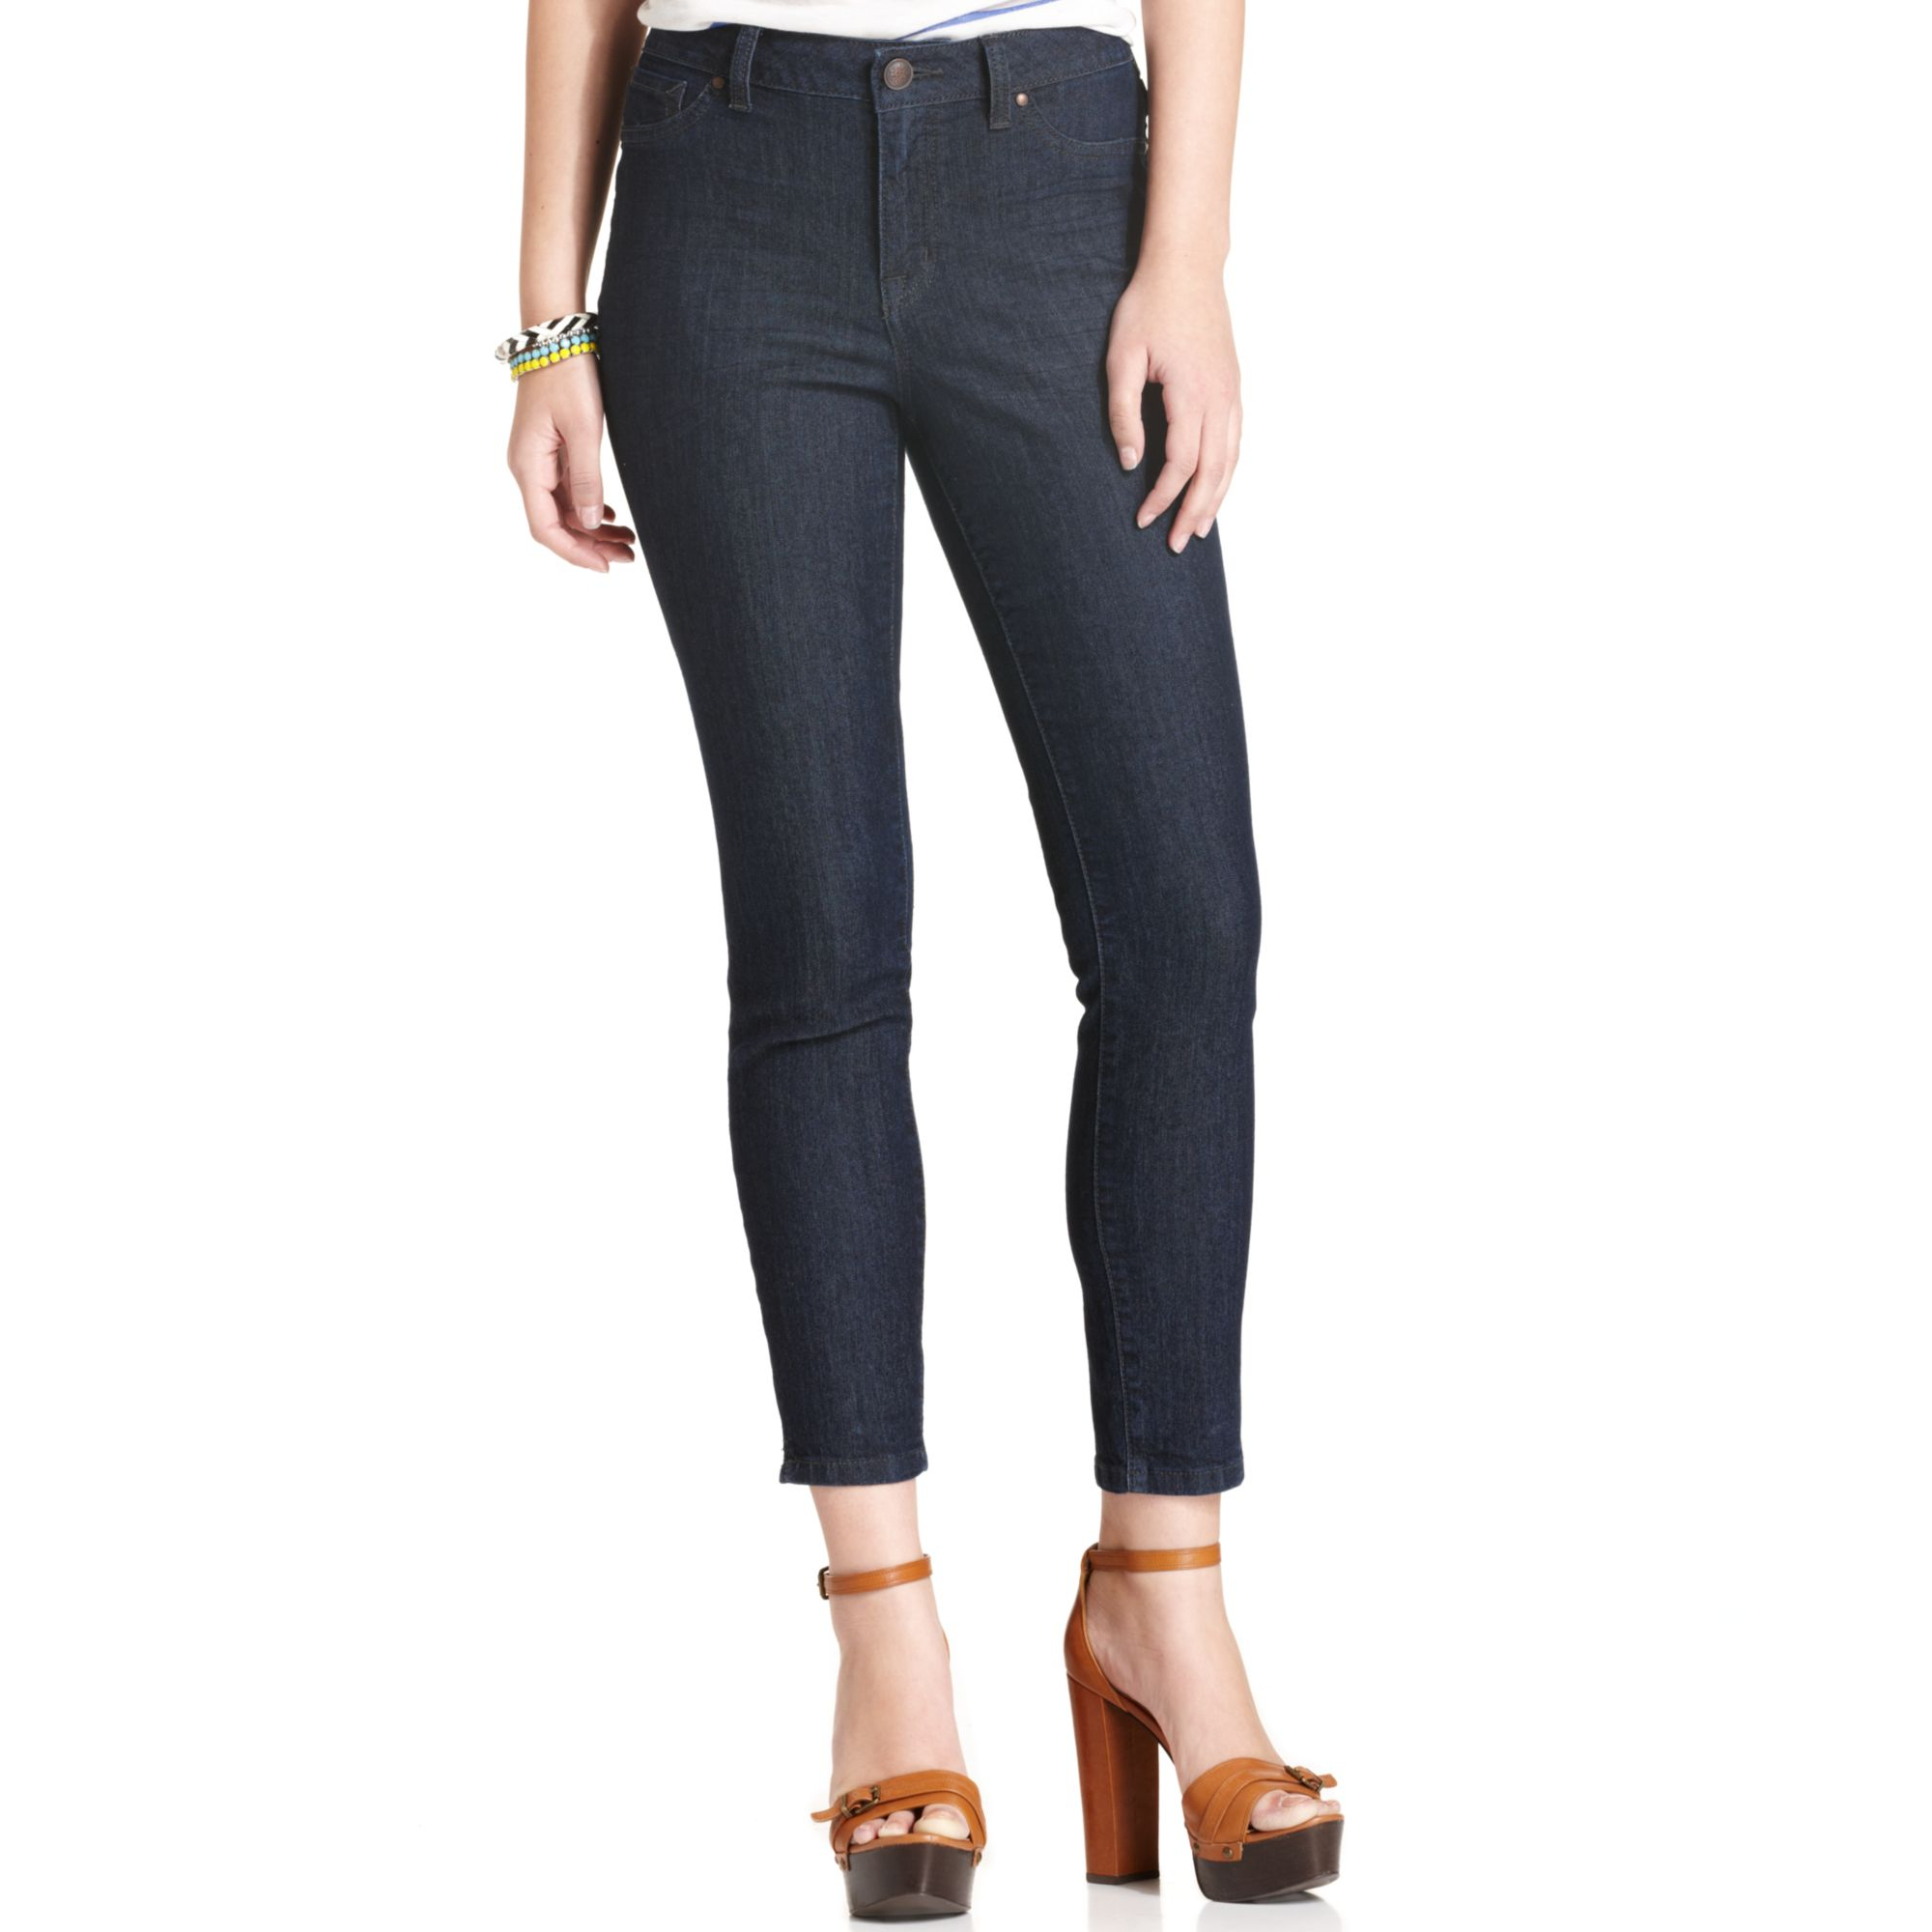 Jessica simpson Uptown Cropped Skinny Jeans in Black | Lyst